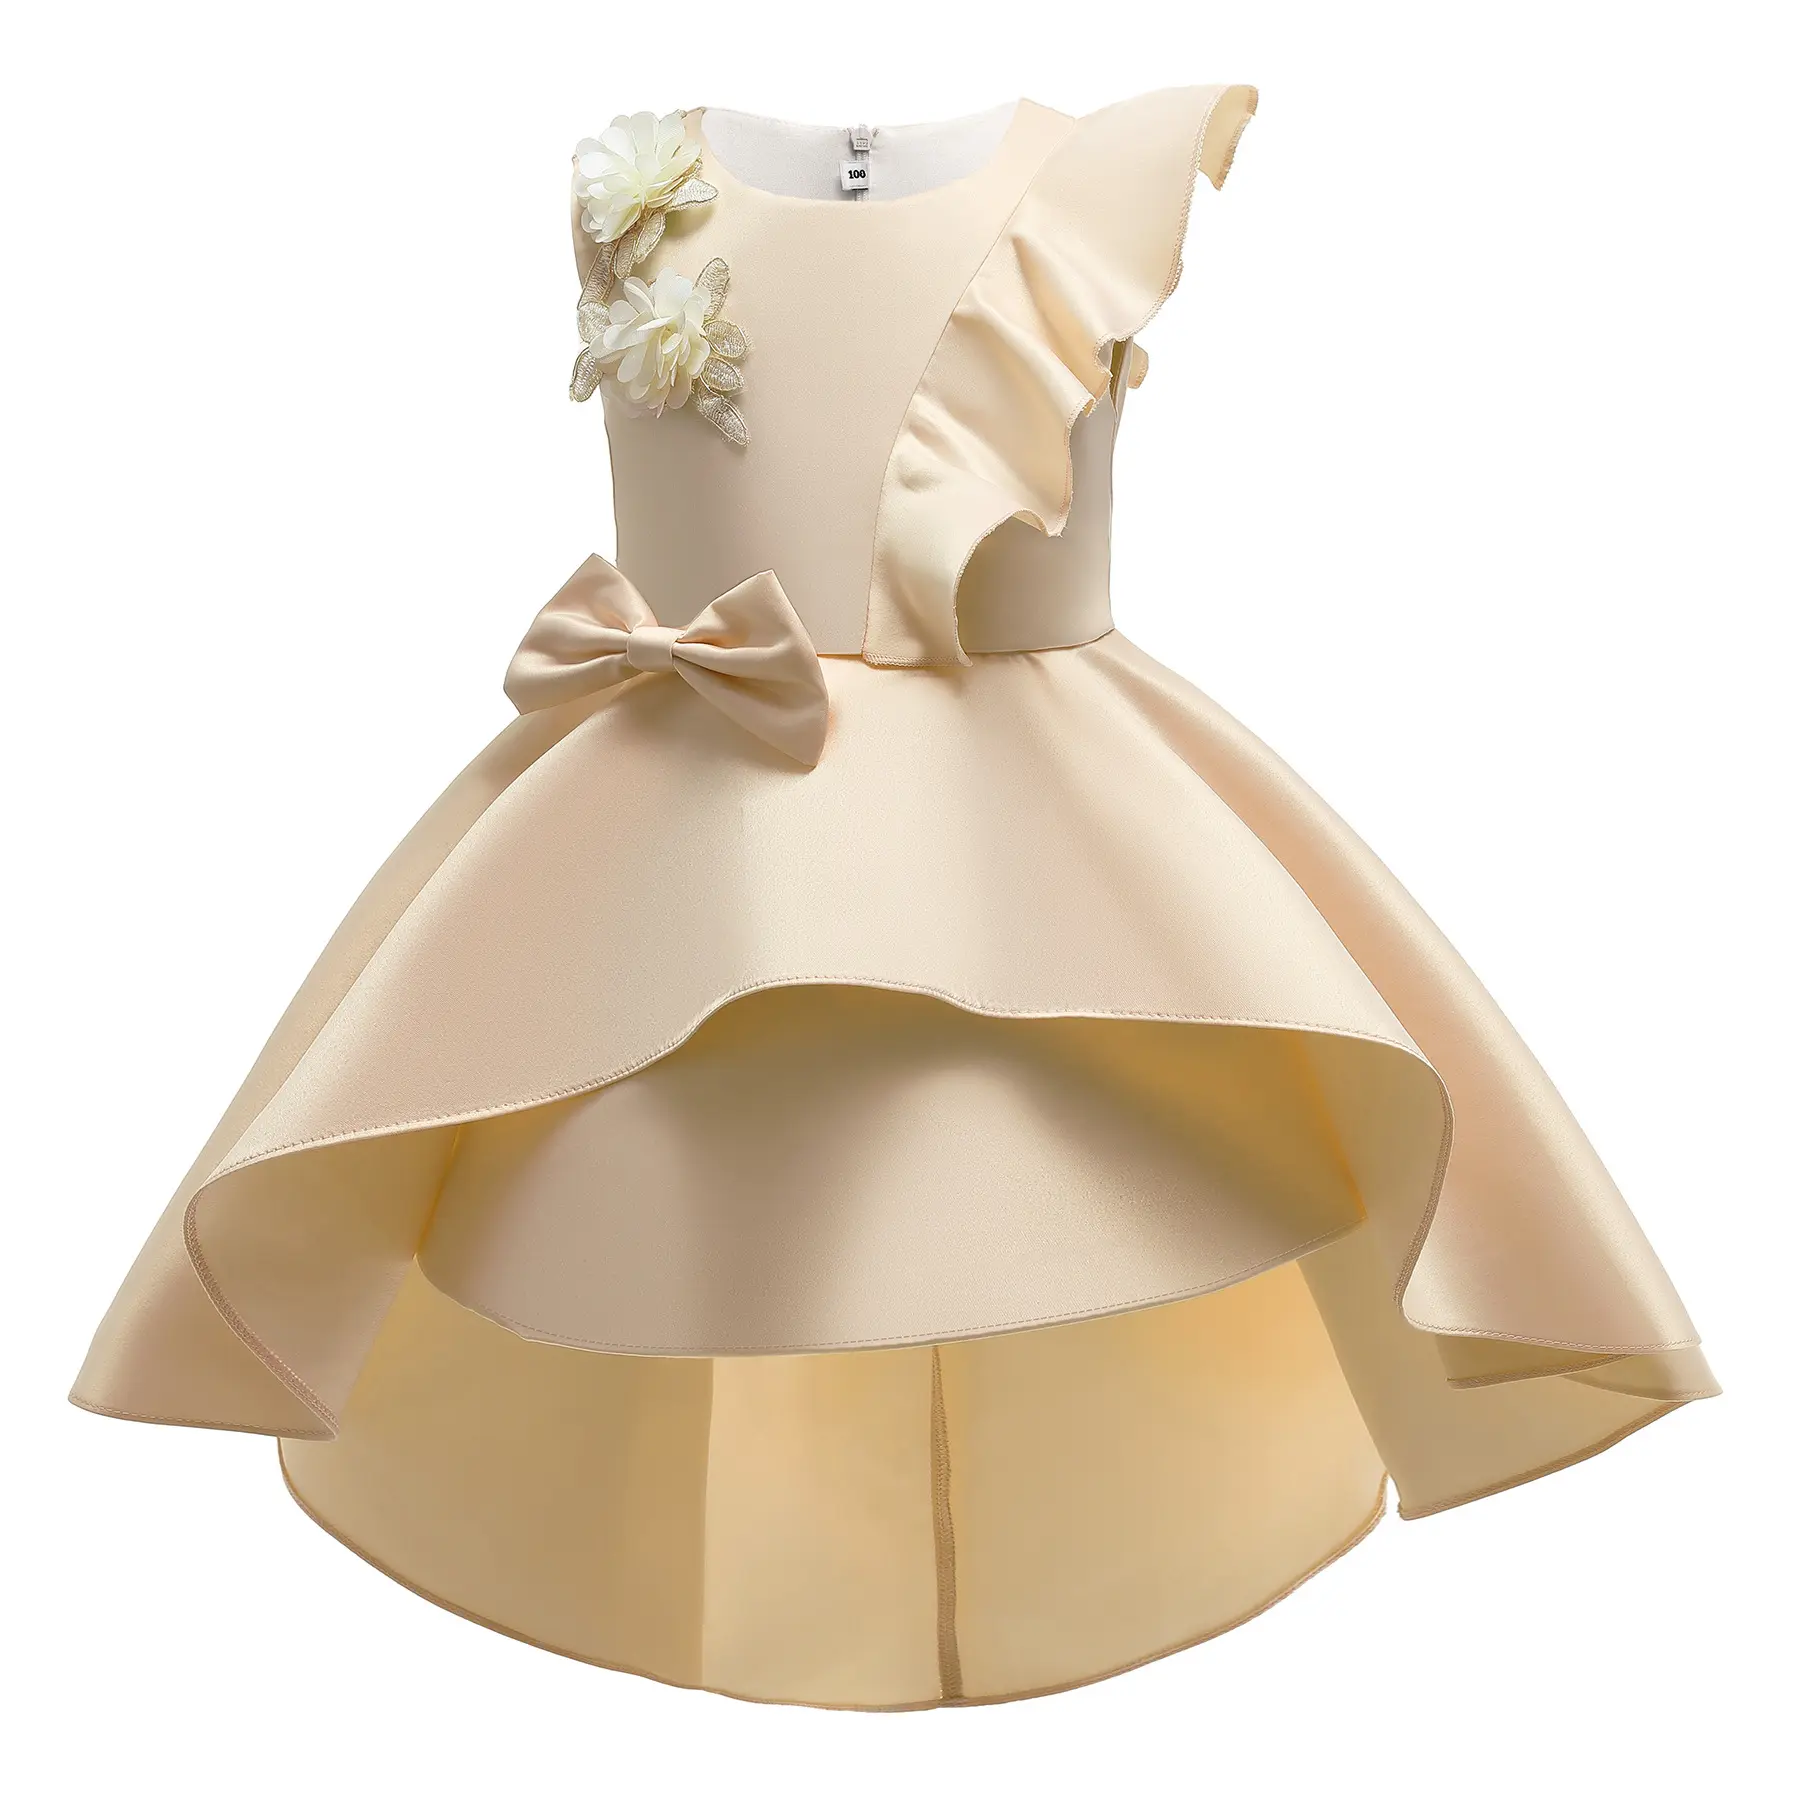 New Fashion Kids Party Wear Dresses Latest Girls Frock Designs Ruffle Dress For Girls Of 8 Years Old